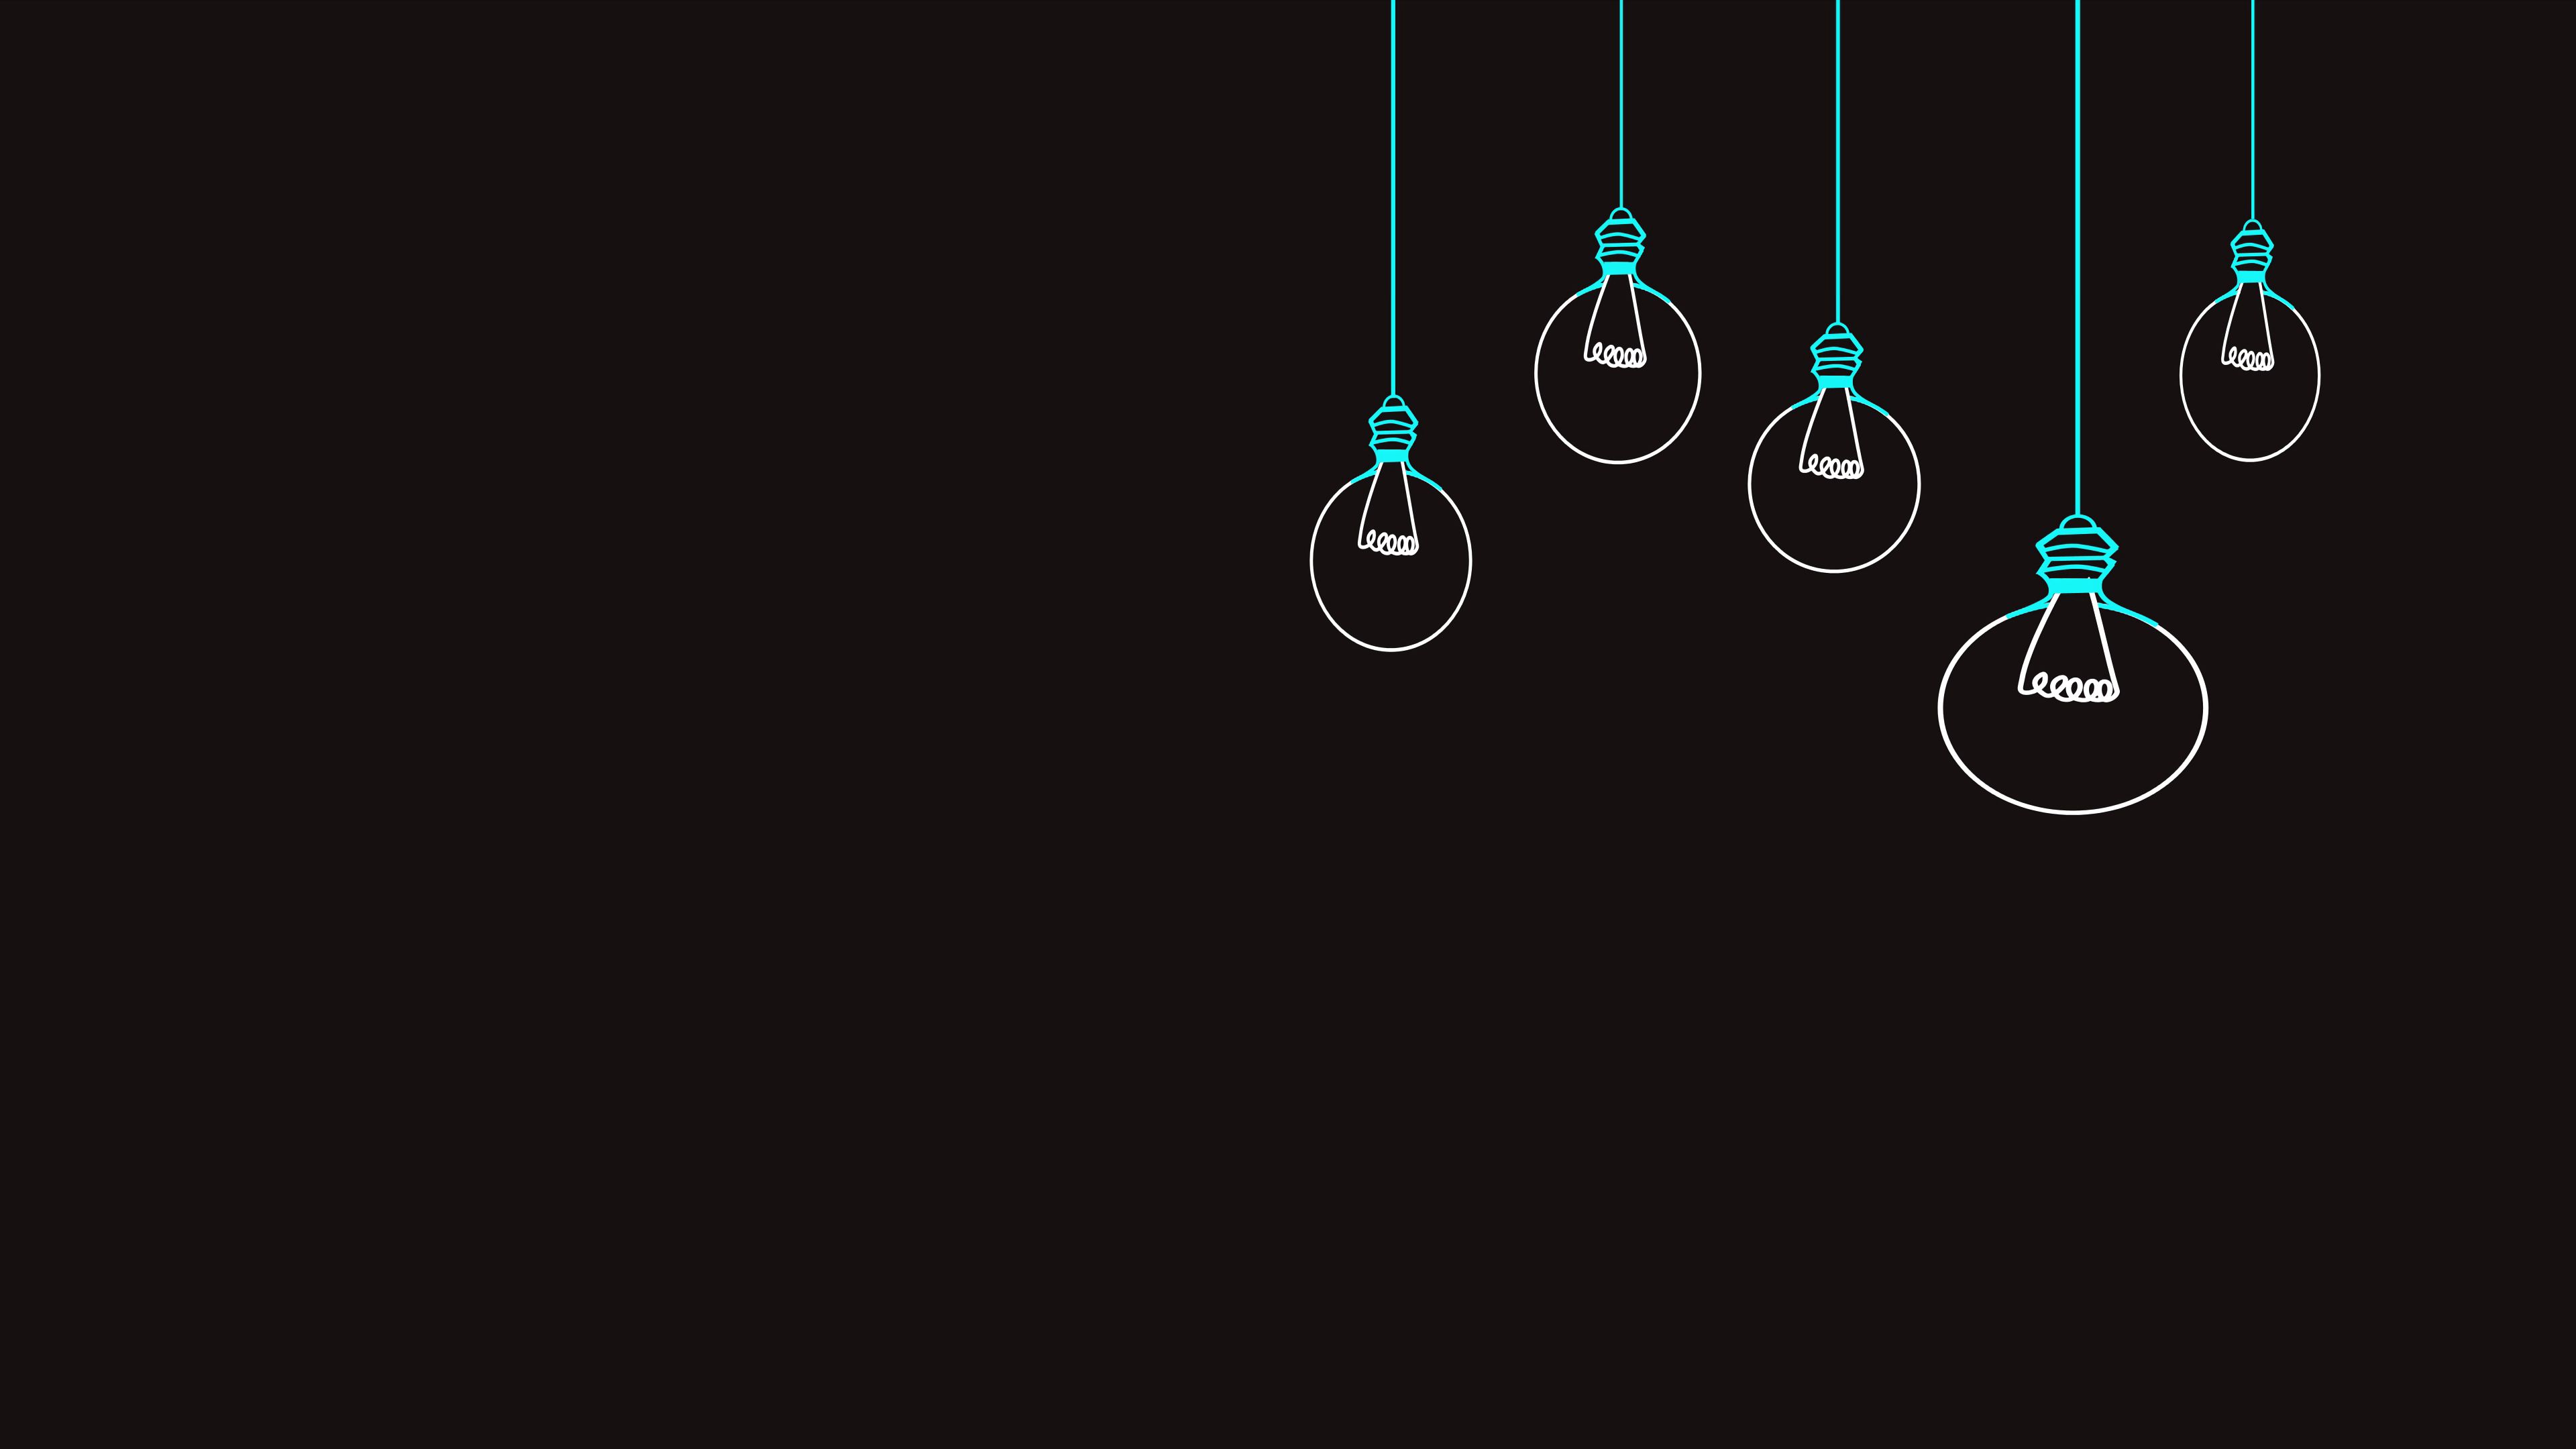 picture, drawing, vector, light bulbs, black background, minimalism wallpapers for tablet